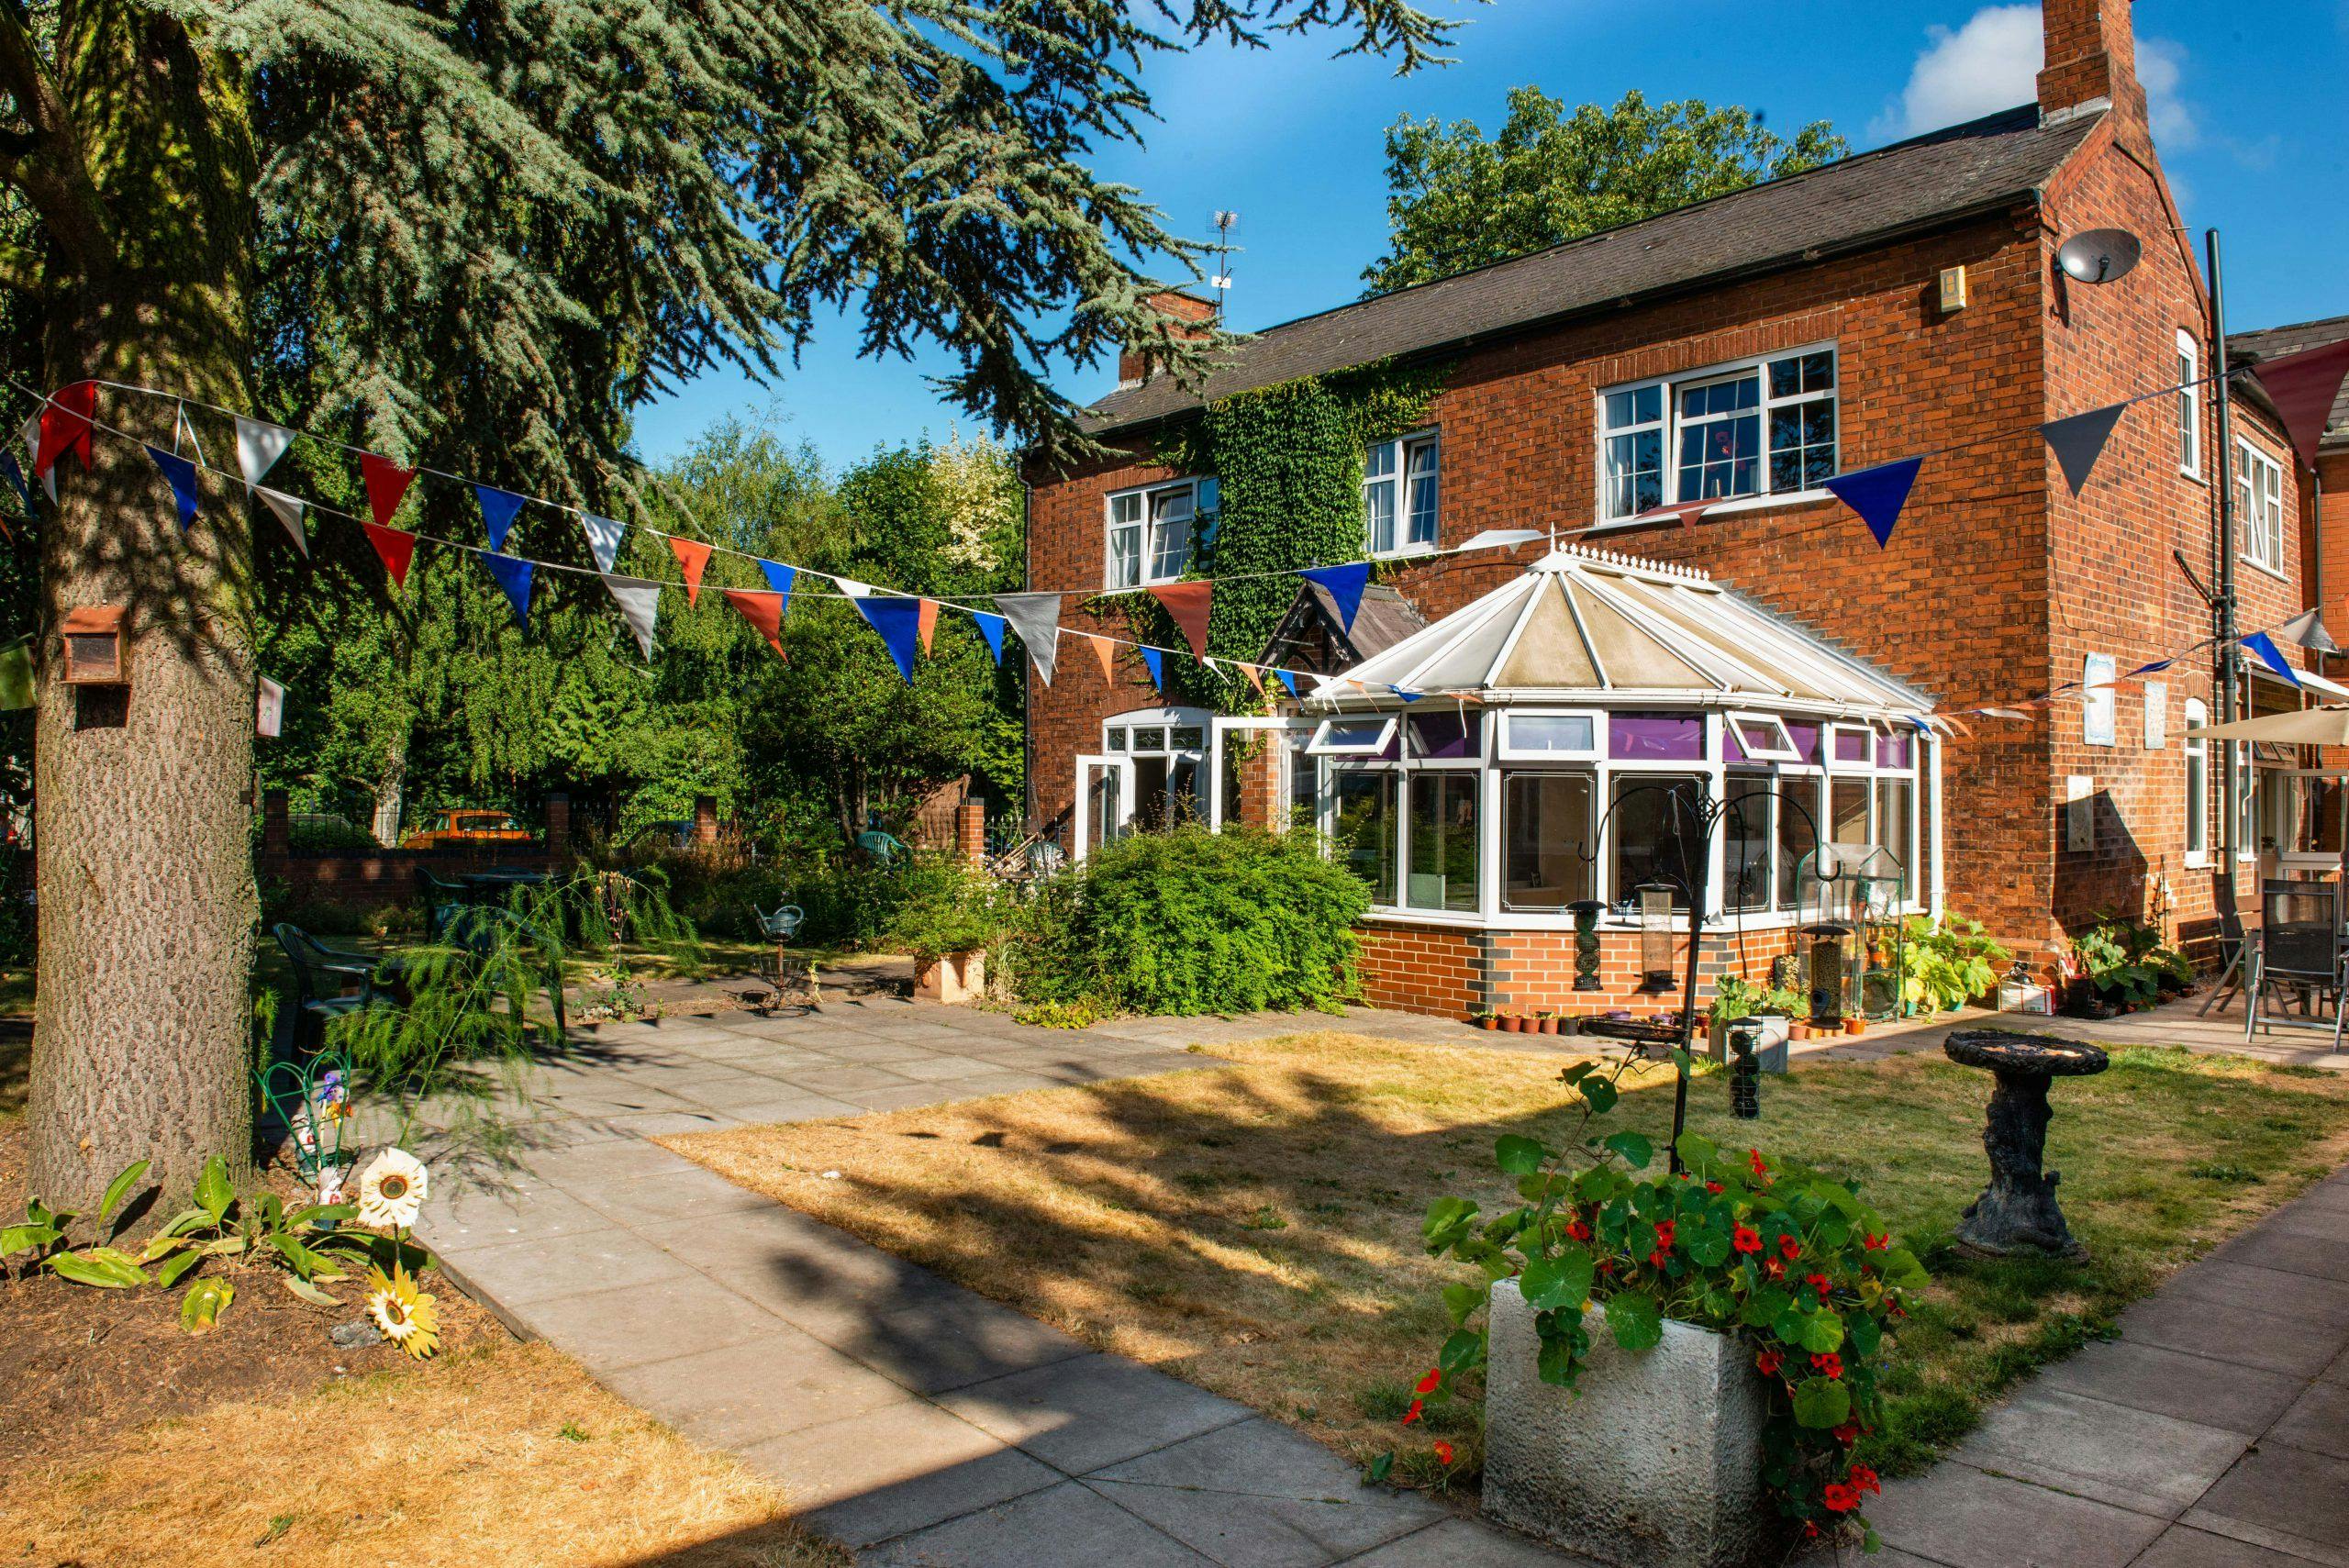 Garden Area of The Firs Care Home in Ripley, Derbyshire